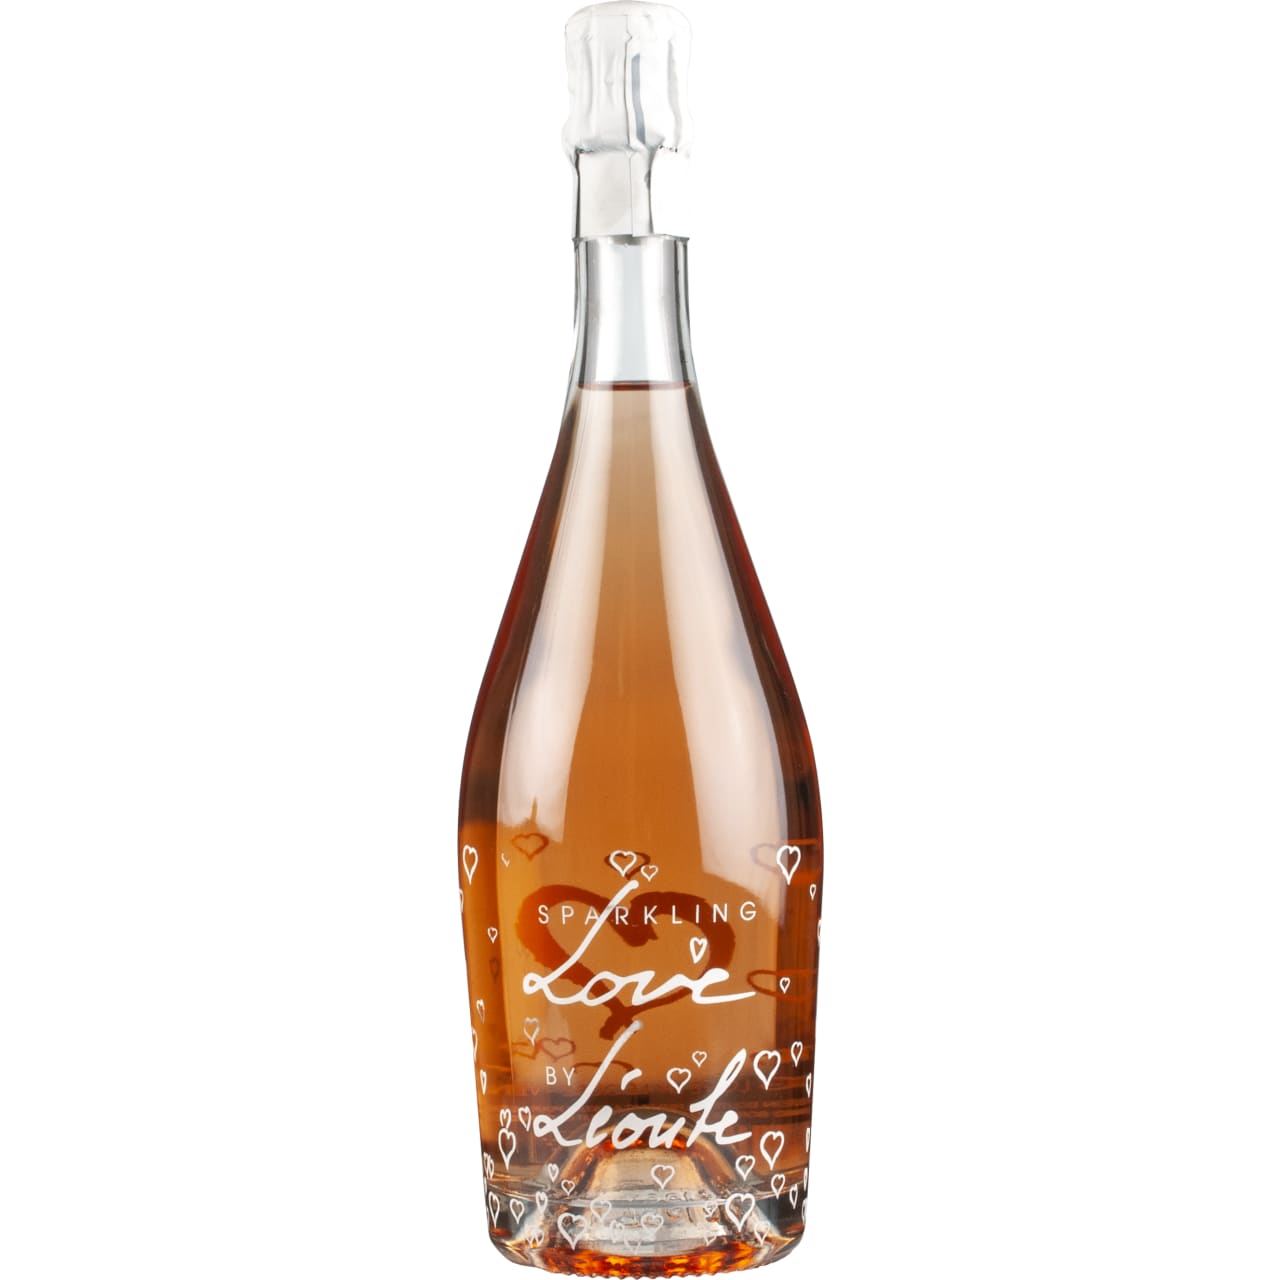 This fresh and balanced sparkling rosé is a blend of traditional Provençal grapes. Showing beautiful red fruit aromas of pomegranate, red berries, and grapefruit.